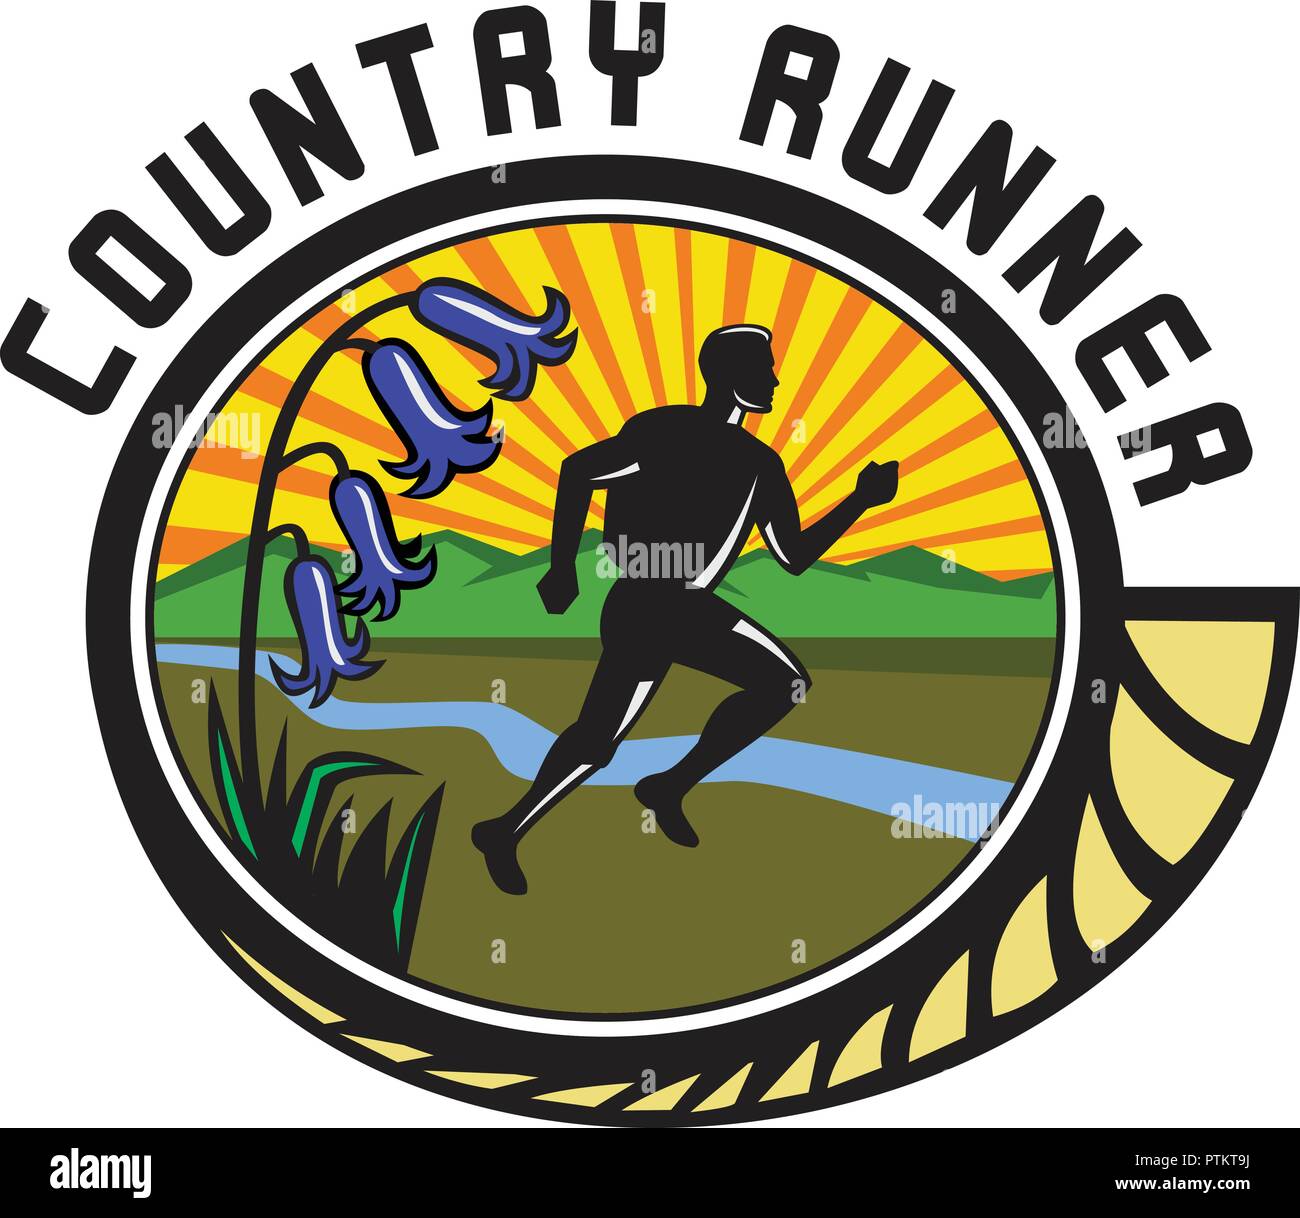 Retro style illustration of a cross country marathon runner running with bluebells, river and mountains with text Country Runner set inside oval on is Stock Vector